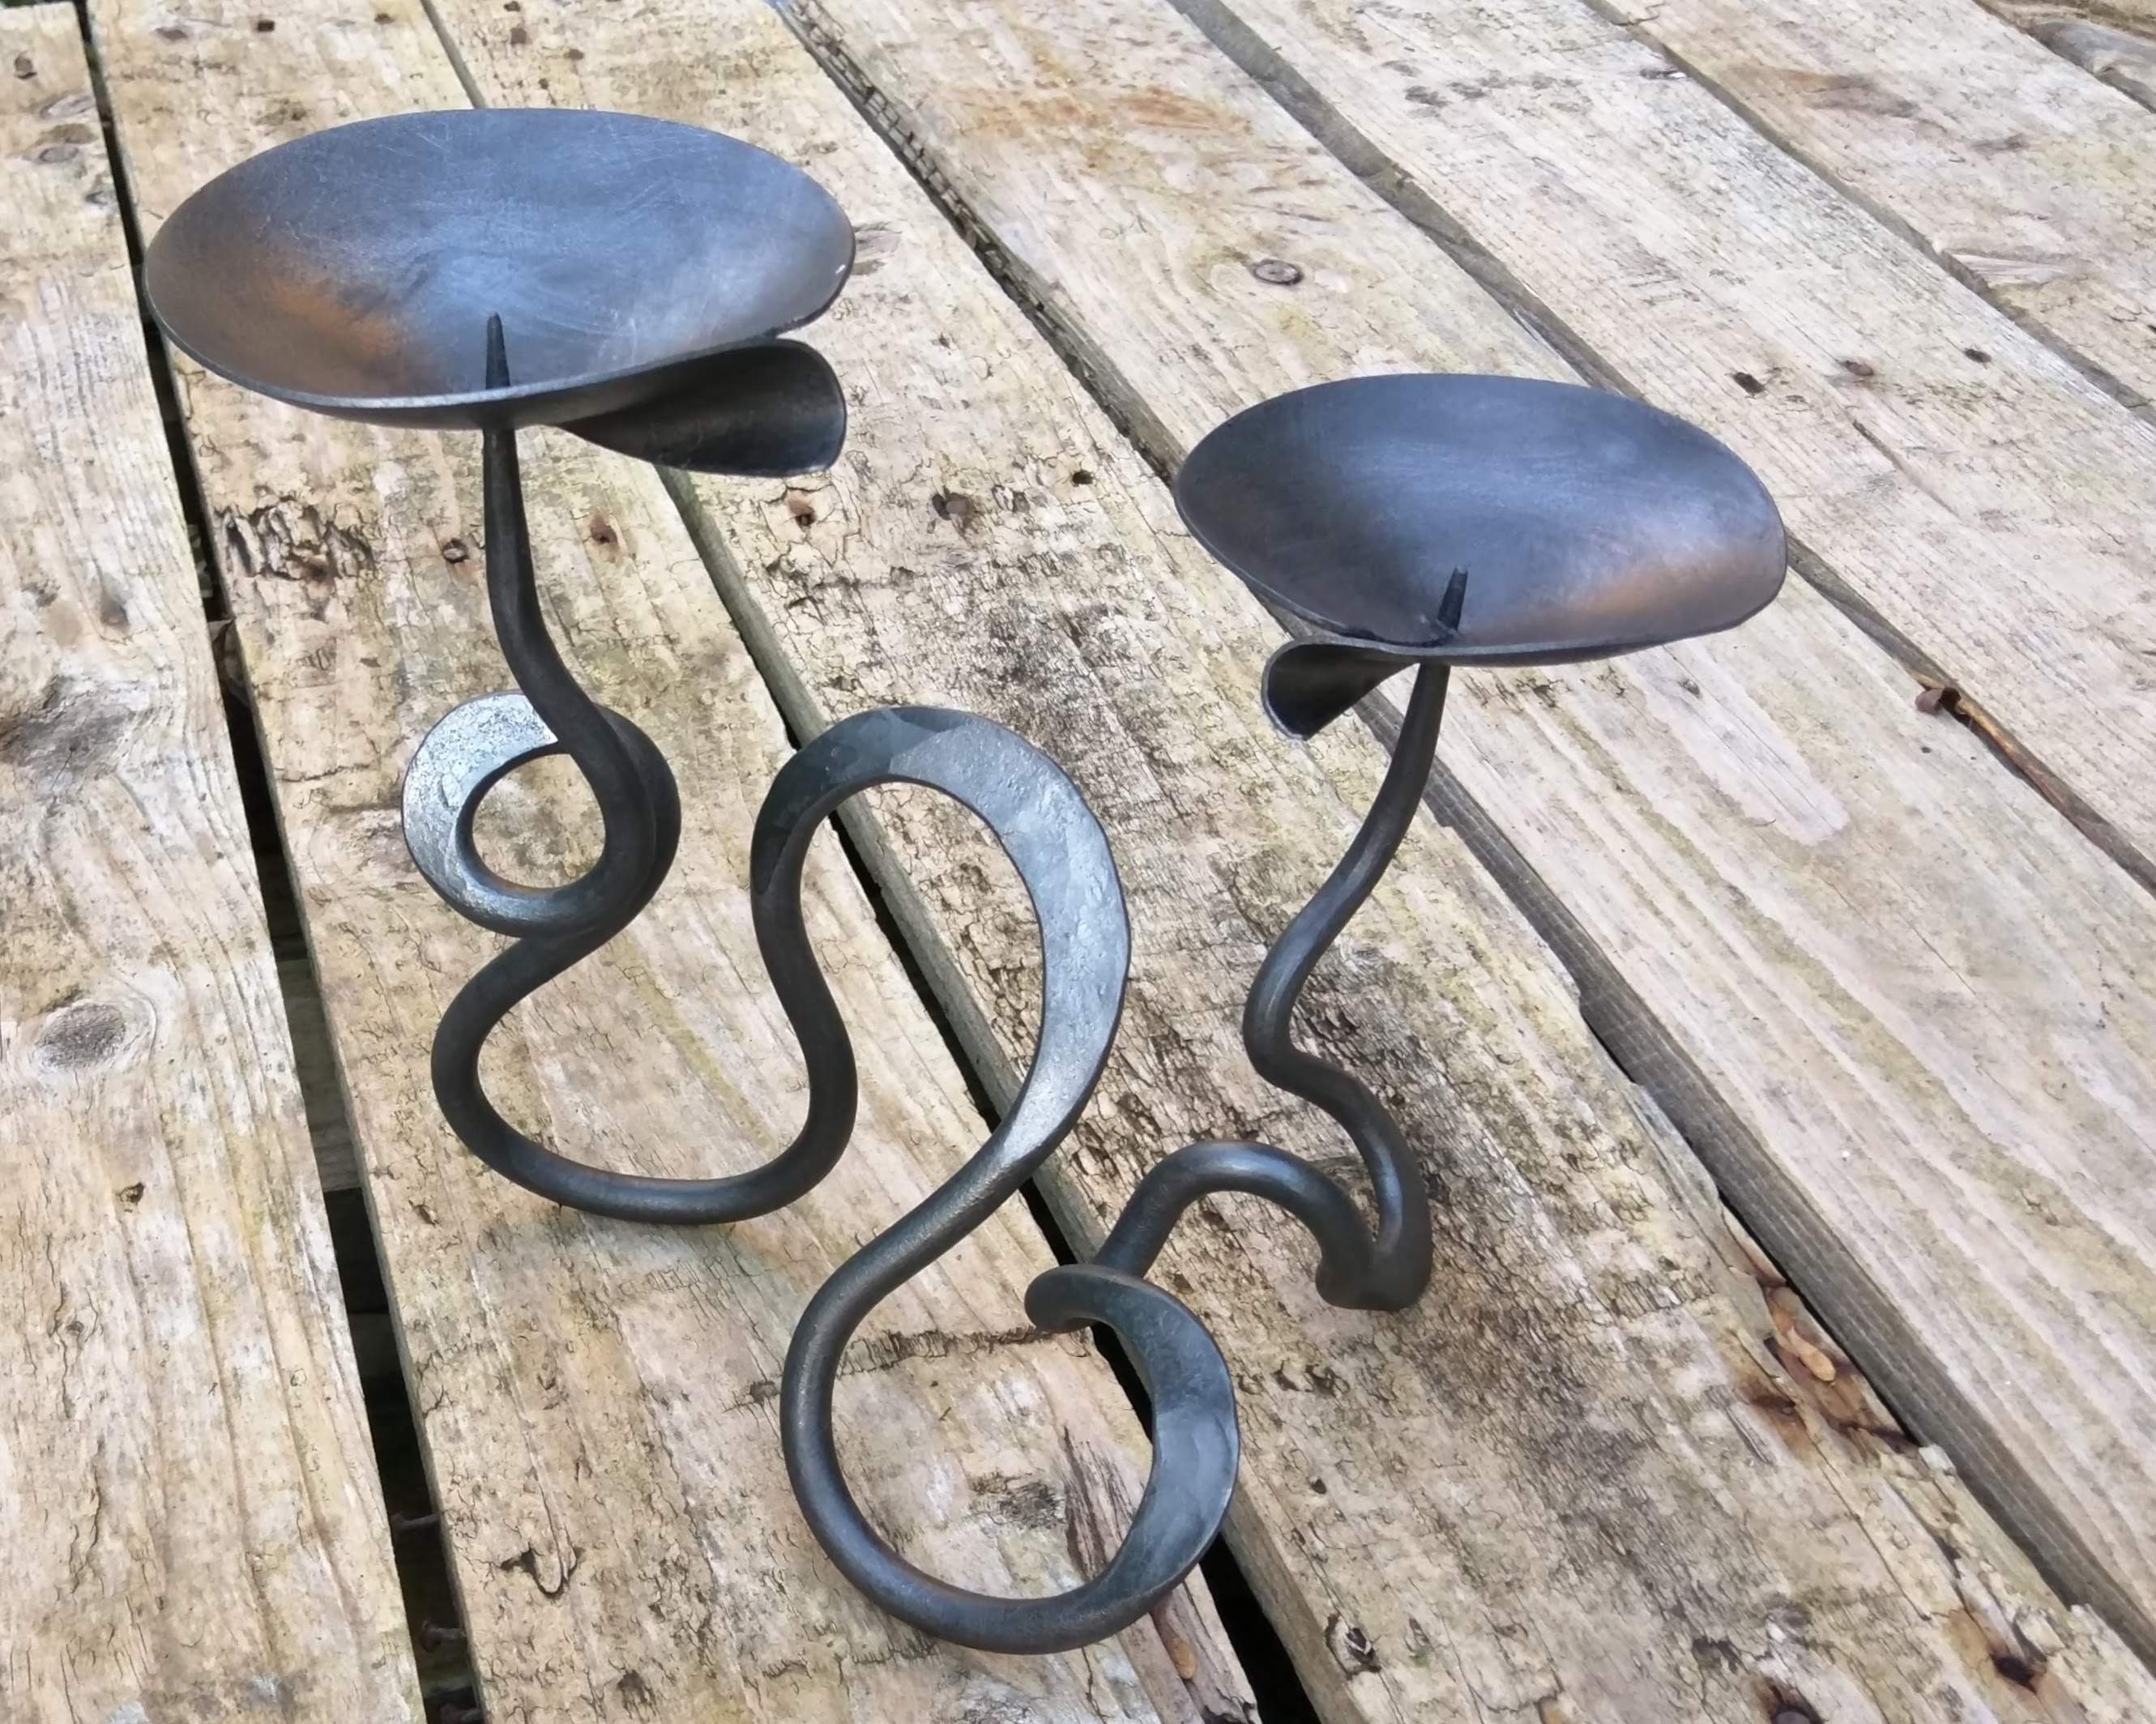 Double candle sconce with fullered scrolls